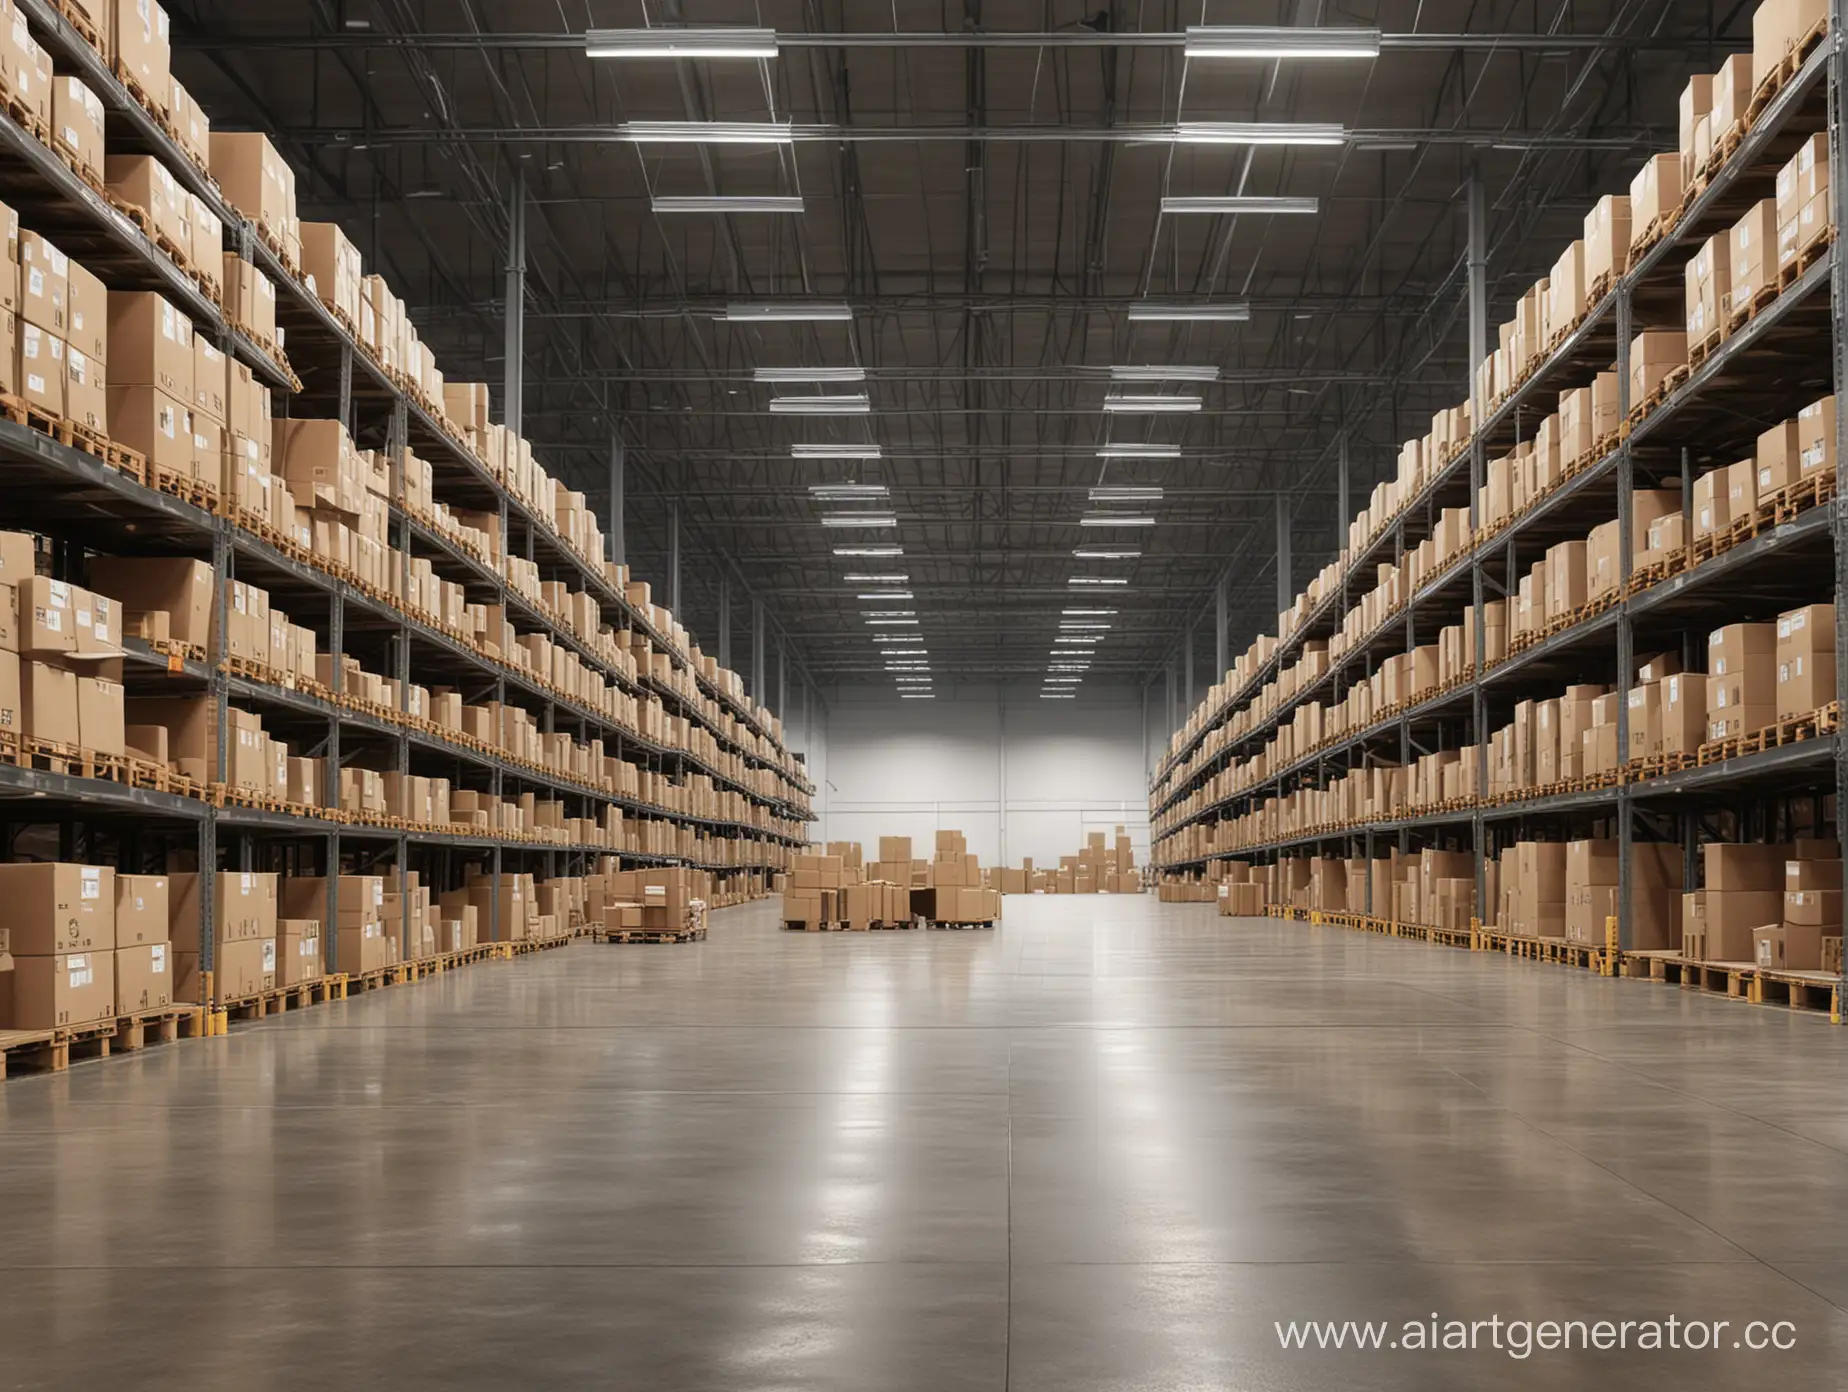 The photo is 100% realistic. A large and bright warehouse with boxes. Long aisles between the shelves.